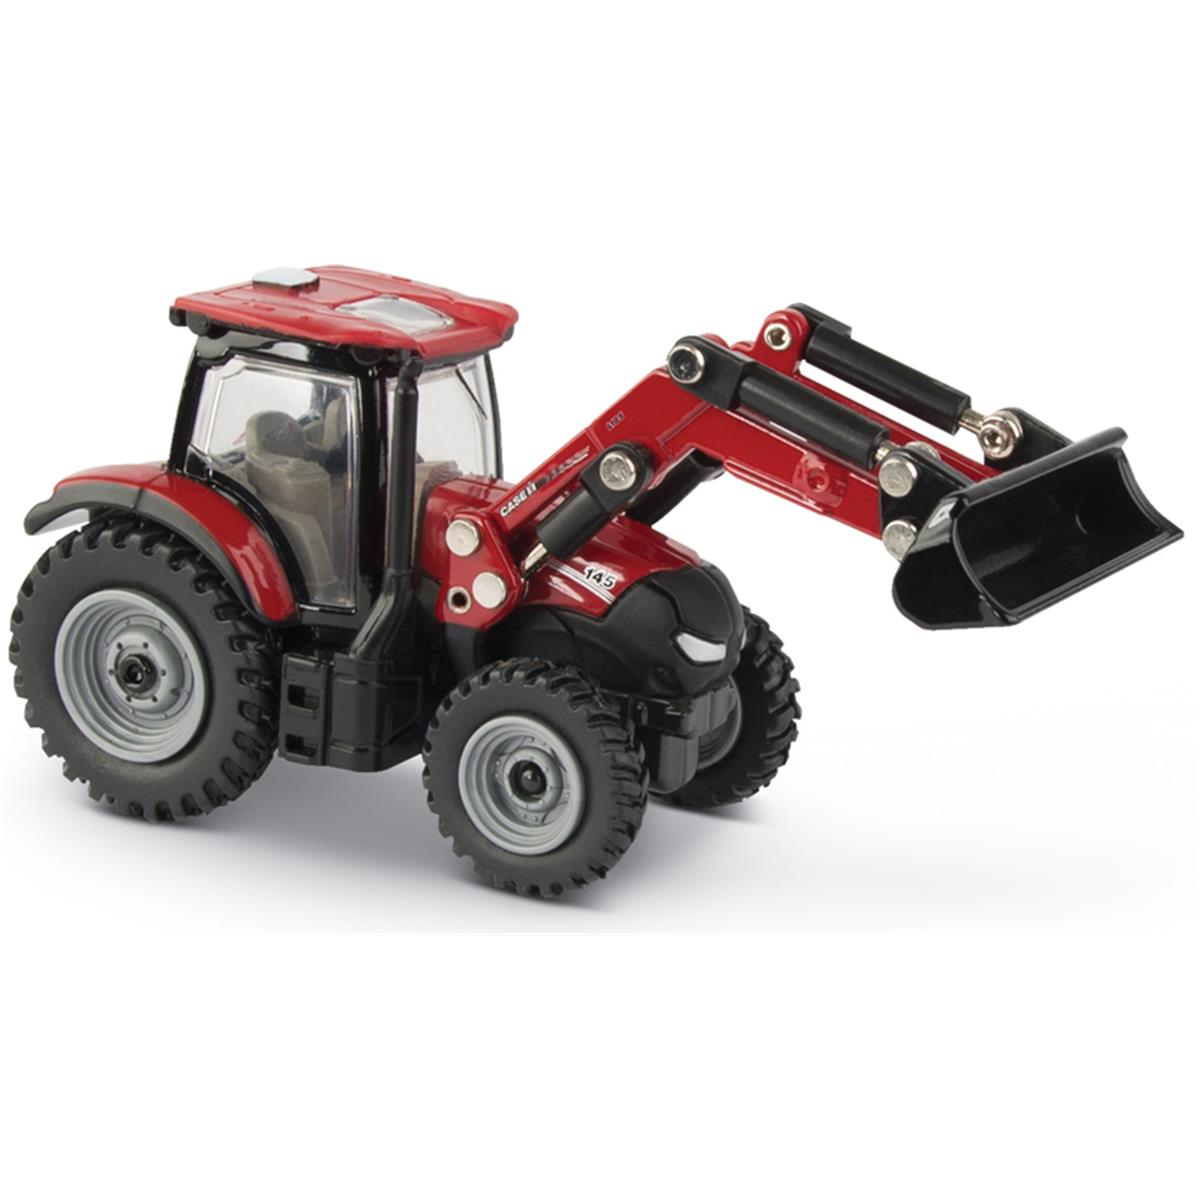 Ert44148 Case Maxxum Tractor With Front Loader